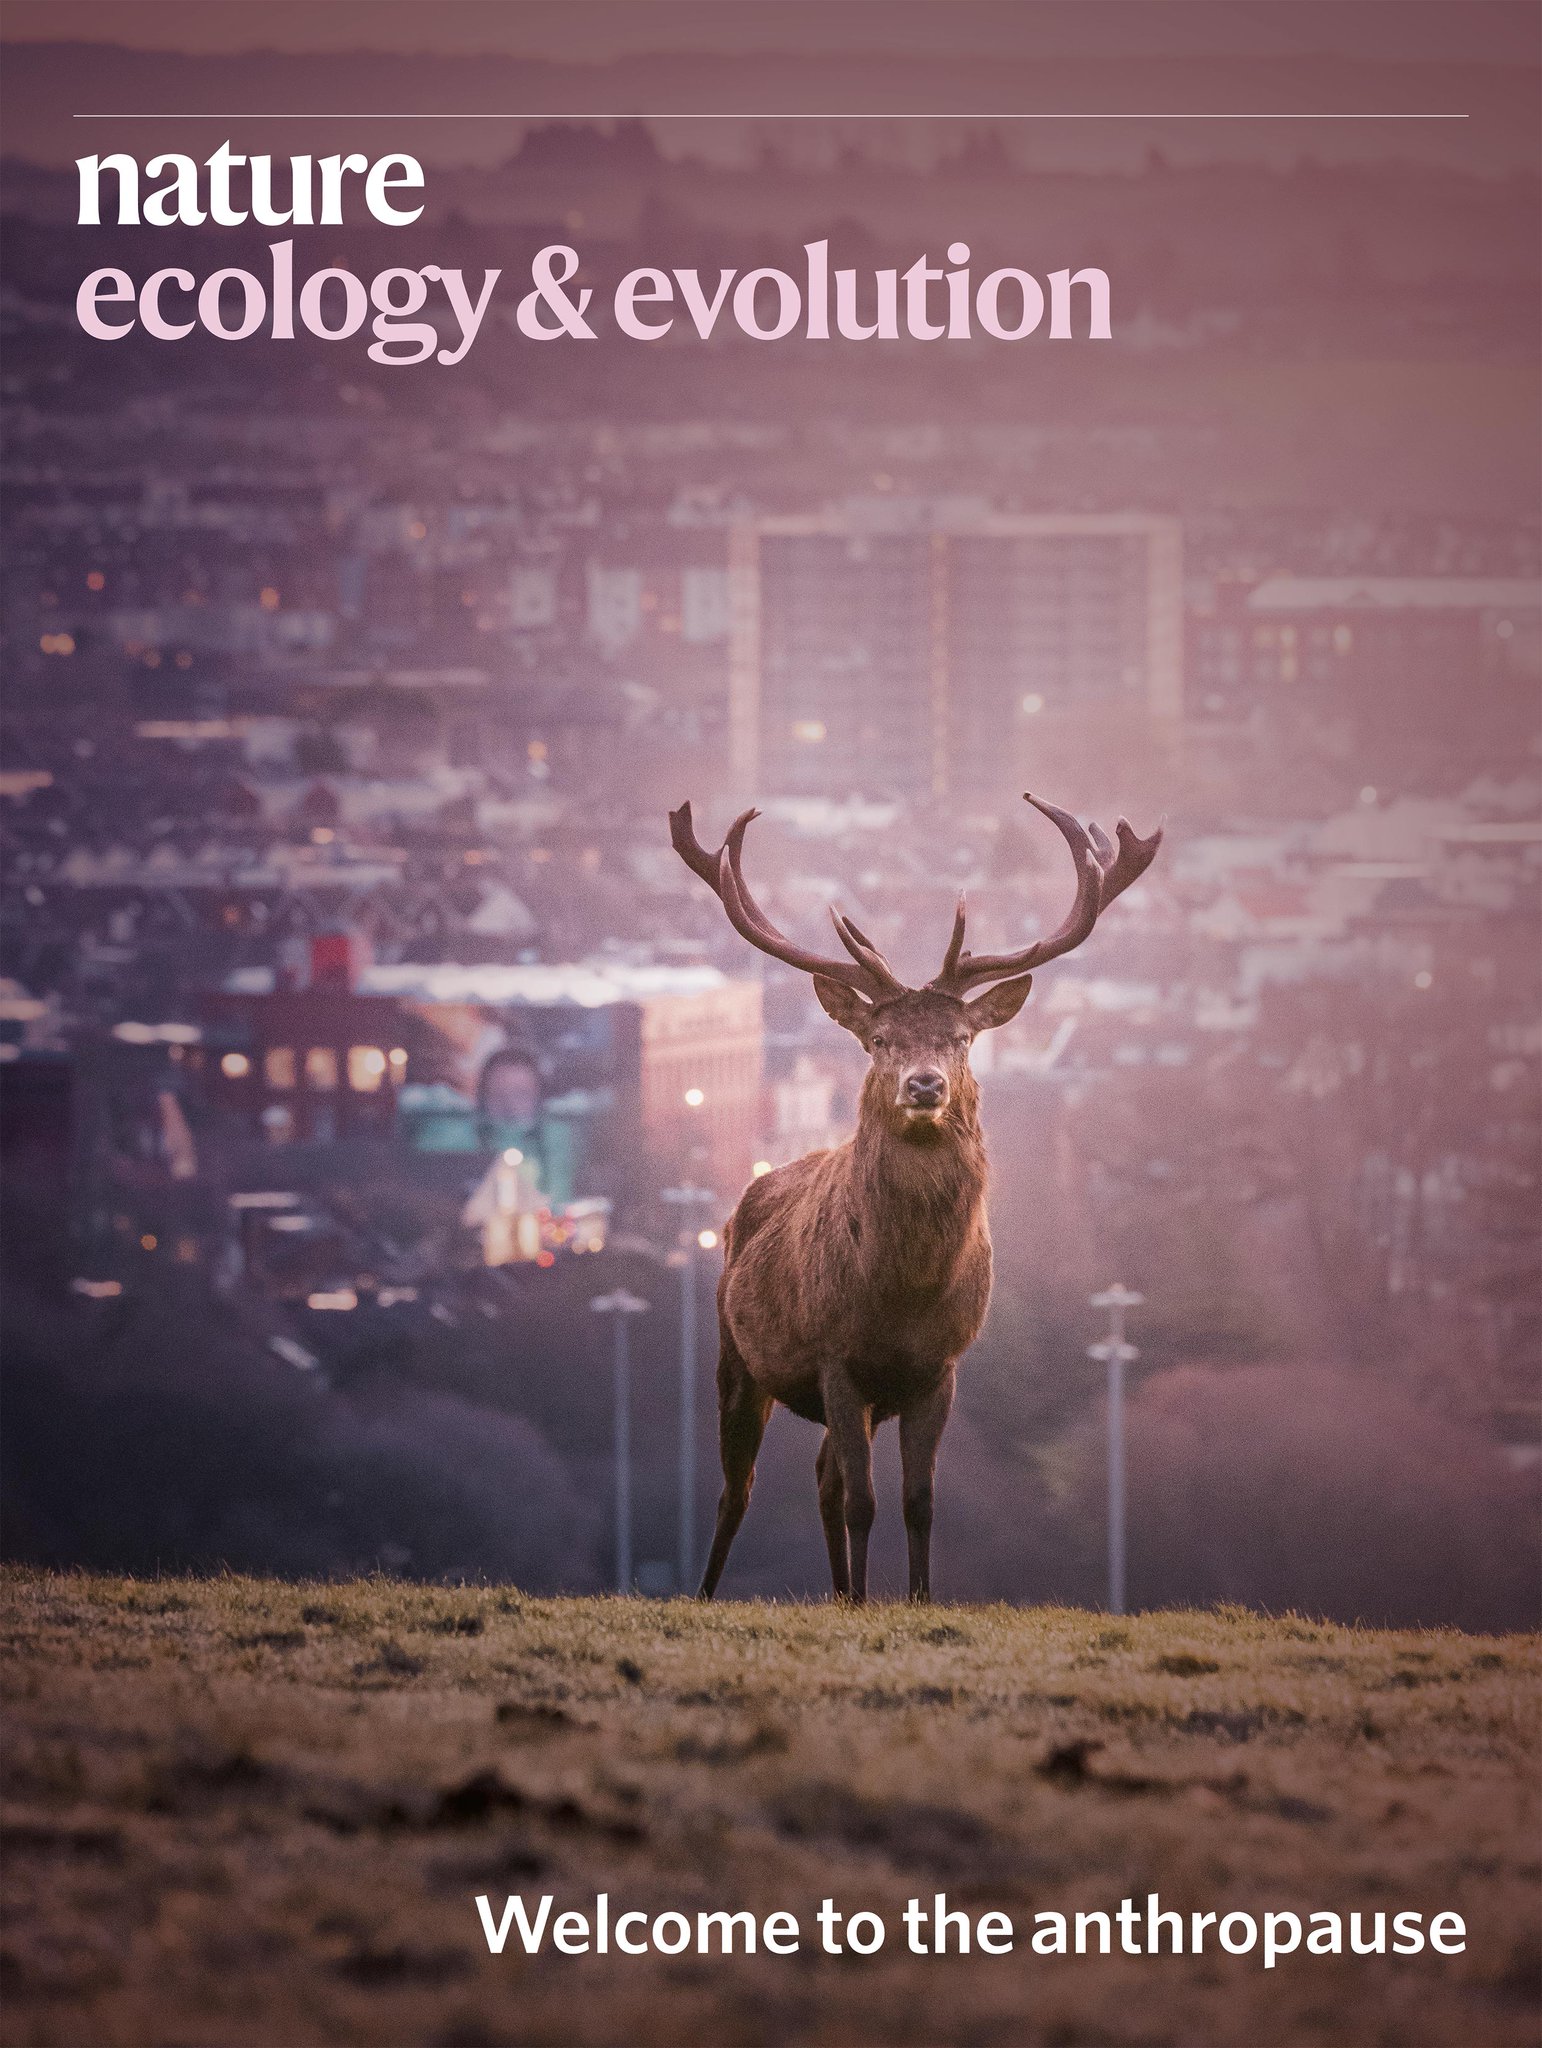 Intl Bio-Logging Soc on Twitter: "Welcome to the #anthropause. Our article  (https://t.co/hmqCopSVFz) made the cover of @NatureEcoEvo  (https://t.co/r8V76nF5Vb)! The @GretaThunberg mural in the background  reminds us that urgent action is required to